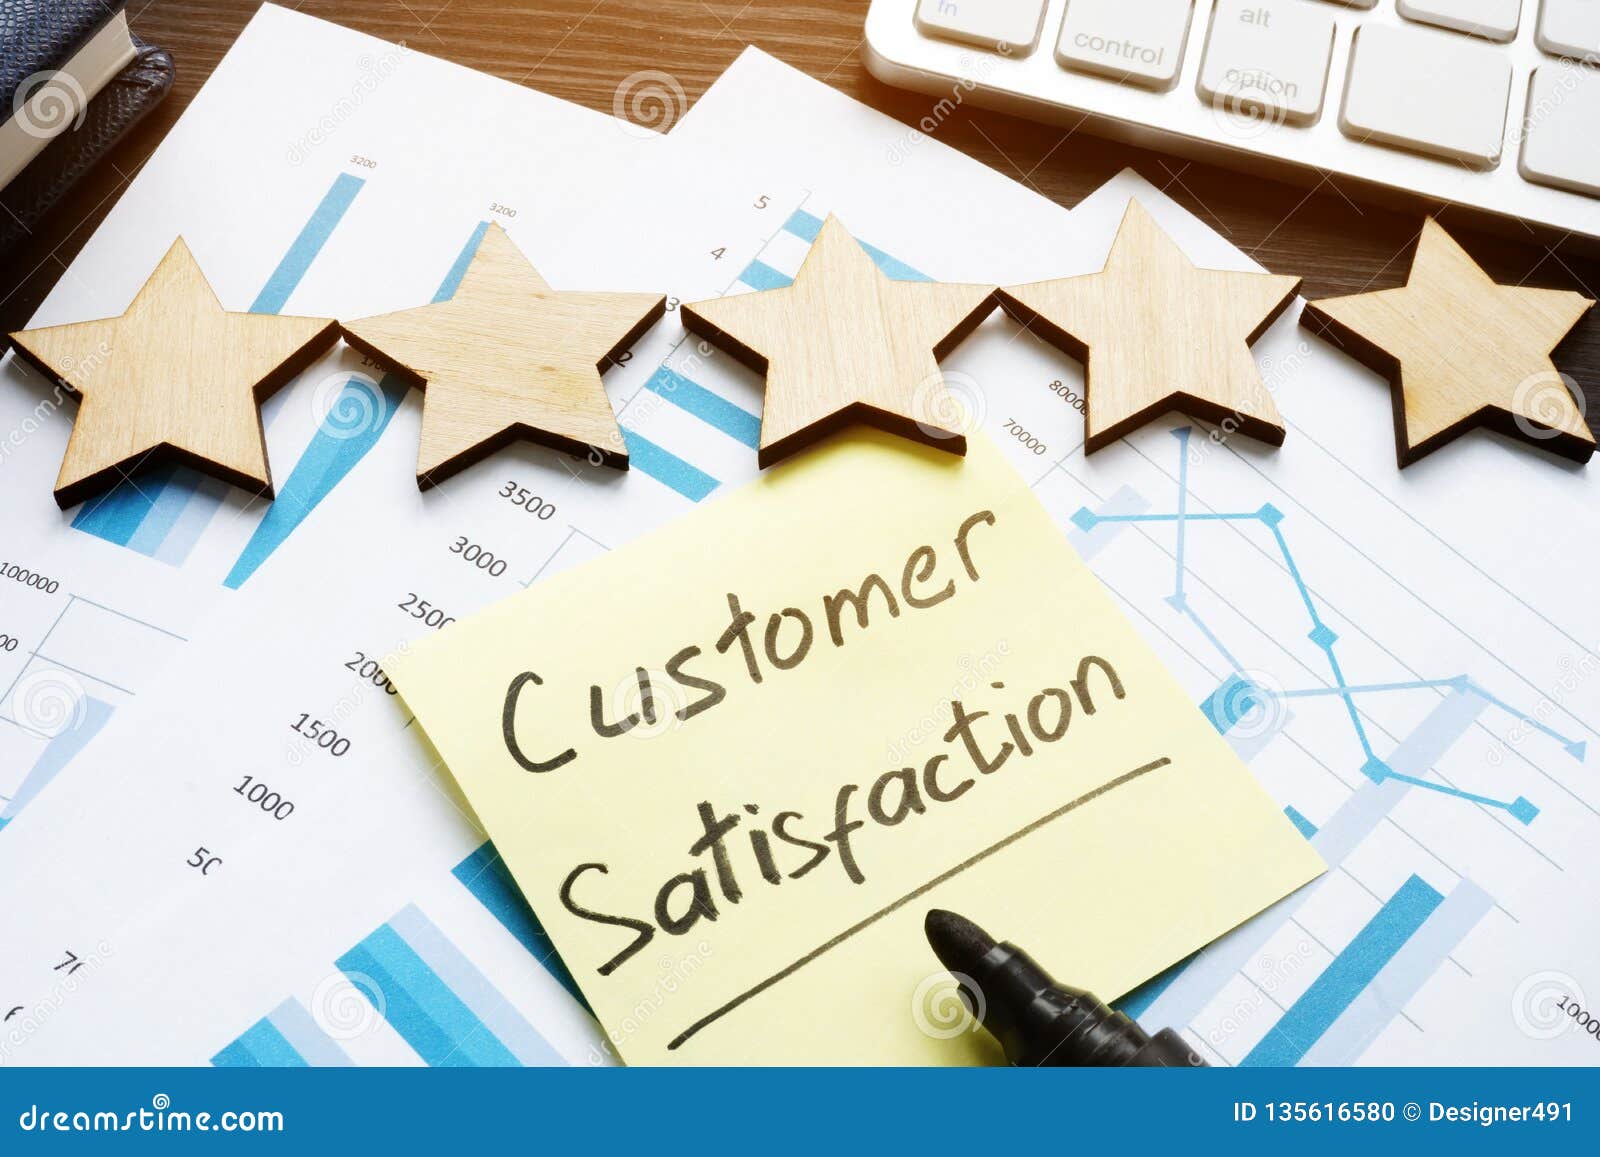 five stars and customer satisfaction. documents on a desk